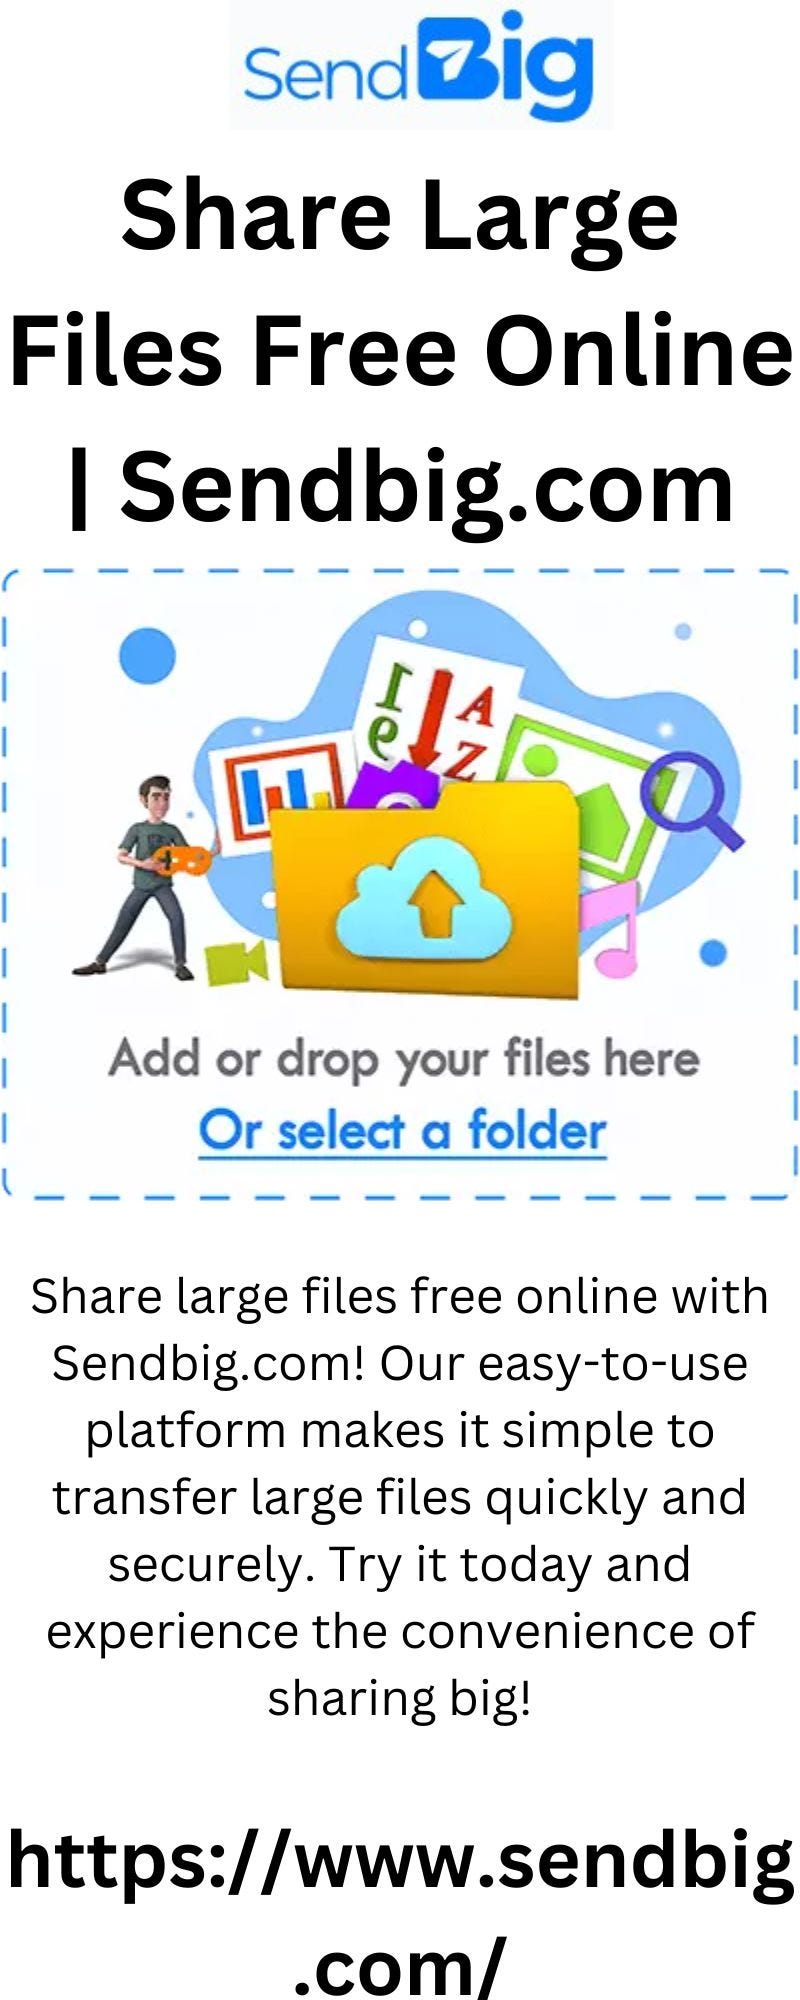 How To Send Large Files for Free